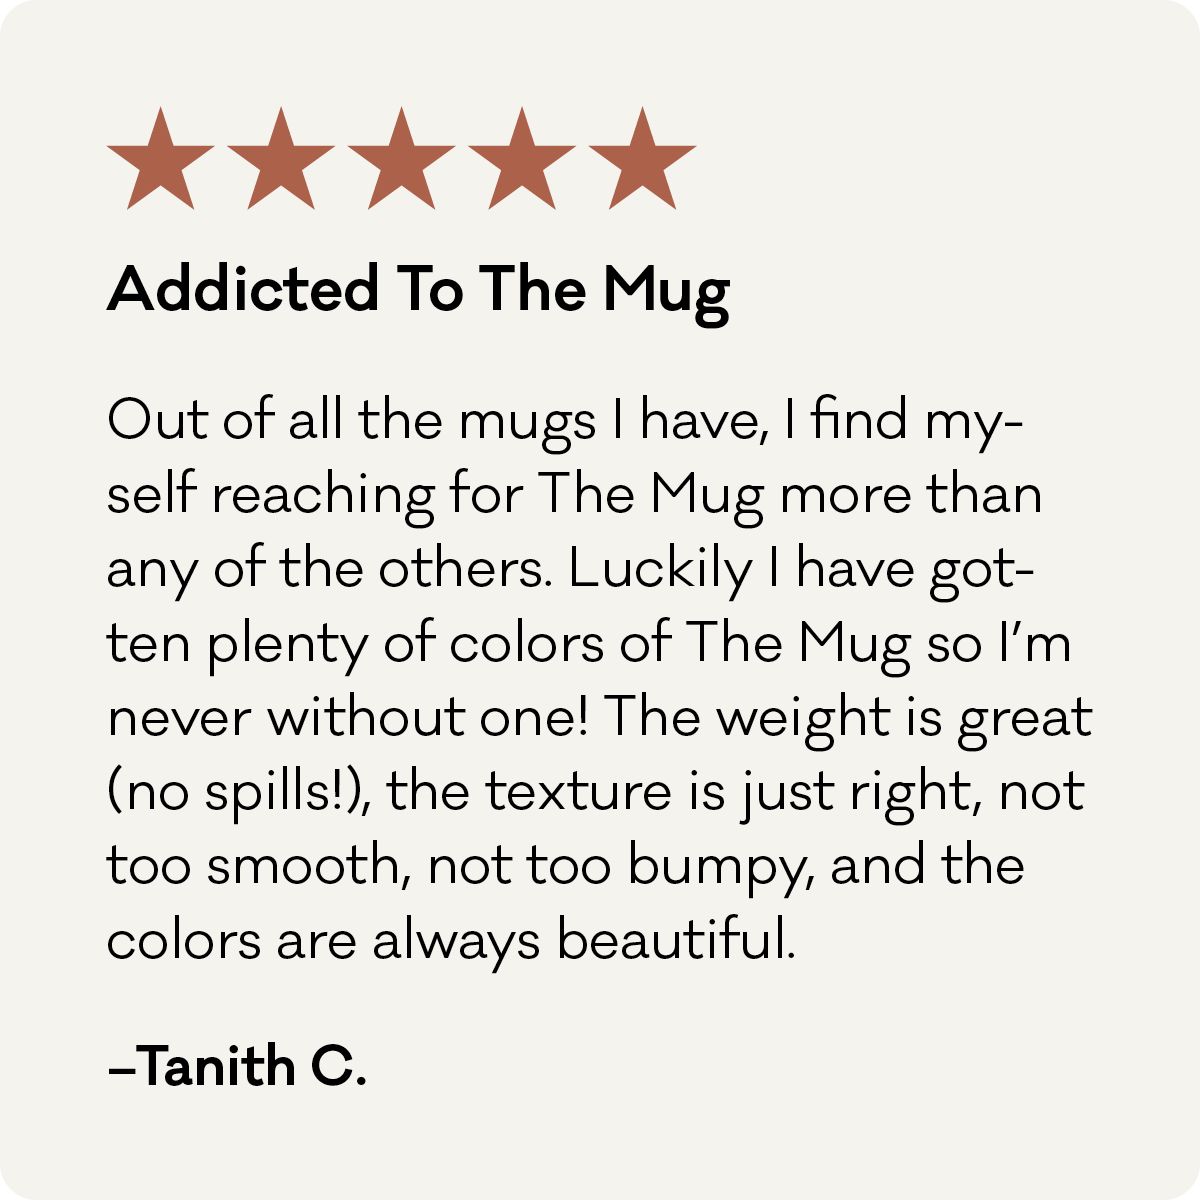 5 Stars, Addicted to the Mug. Out of all the mugs I have, I find myself reaching for The Mug more than any of the others. Luckily, I have gotten plenty of colors of The Mug so I'm never without one! The weight is great (no spills!), the texture is just right, not too smooth, not too bumpy, and the colors are always beautiful. - Tanith C. 